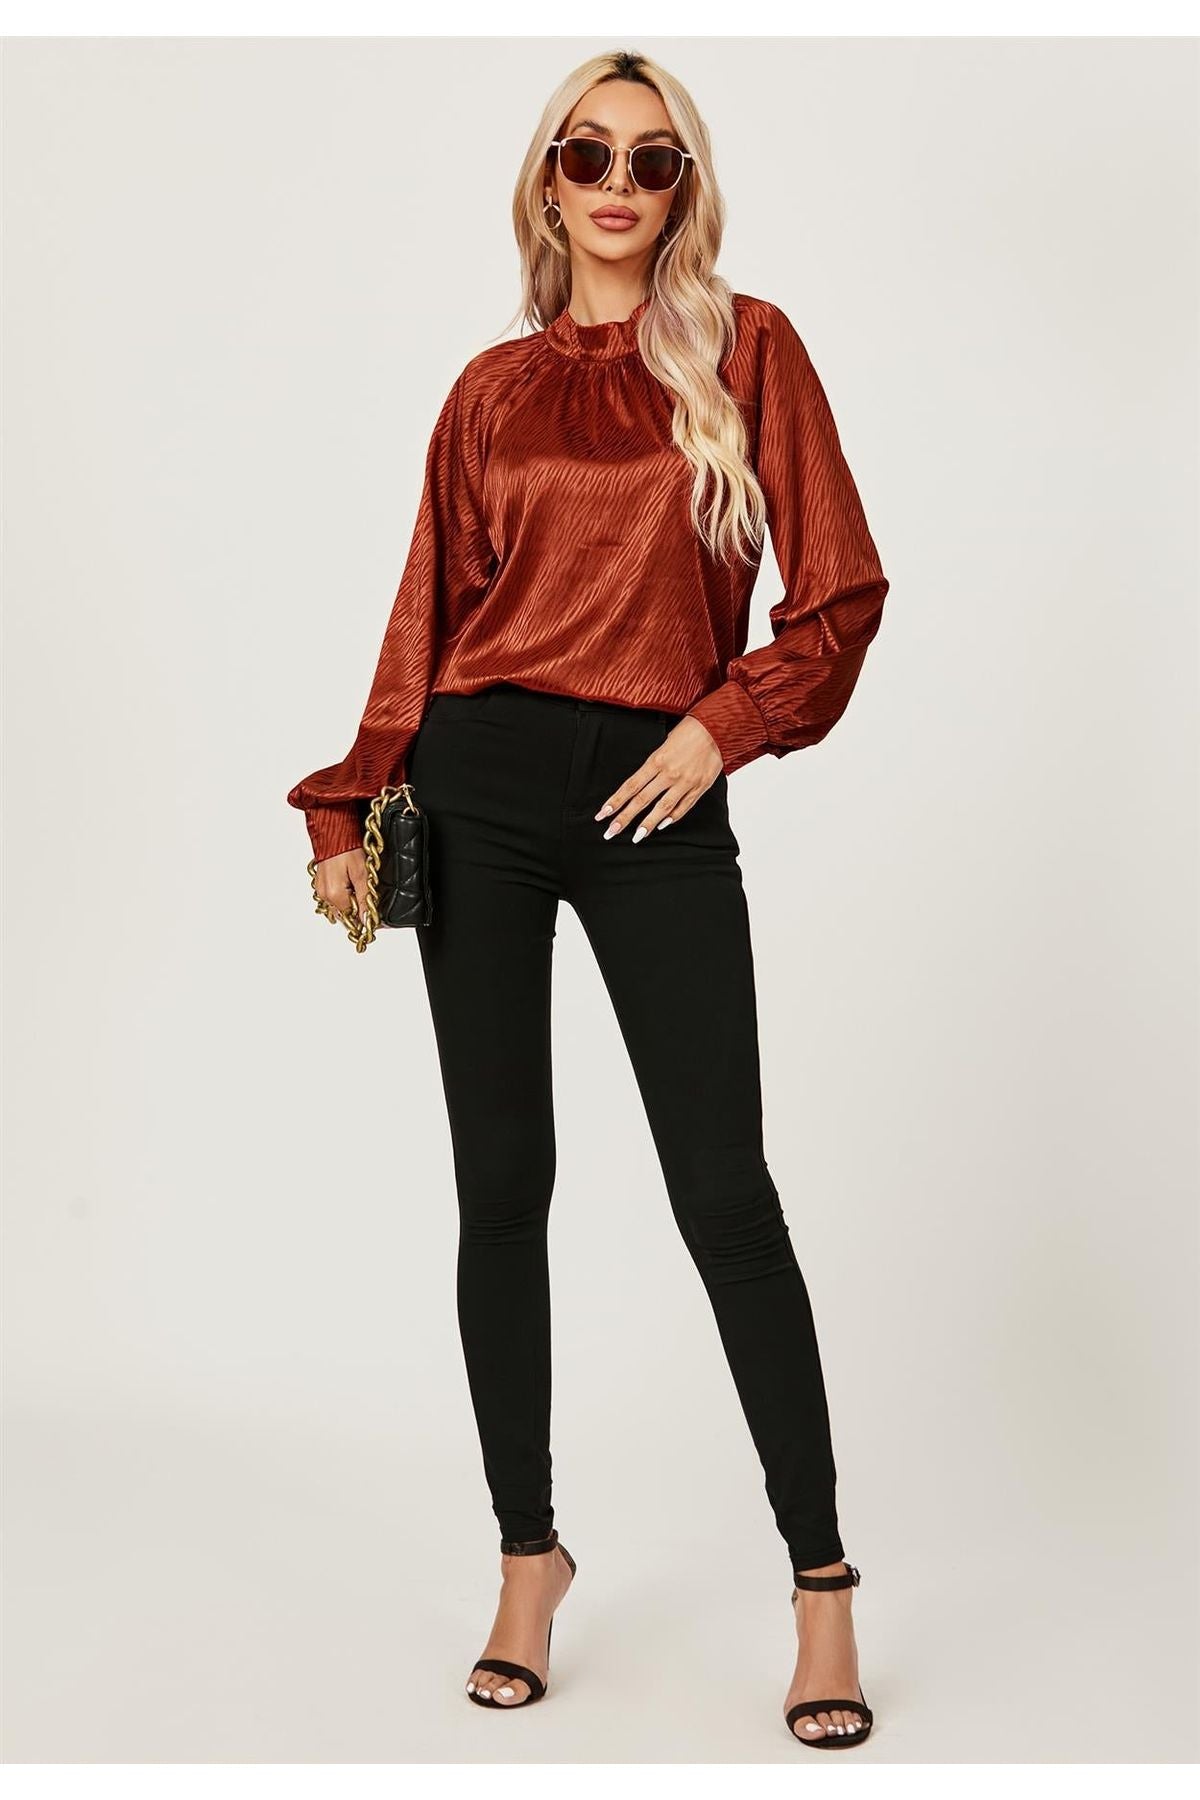 Halter Neck Satin Long Sleeve Blouse Top In Copper Red FS487-CopperRed